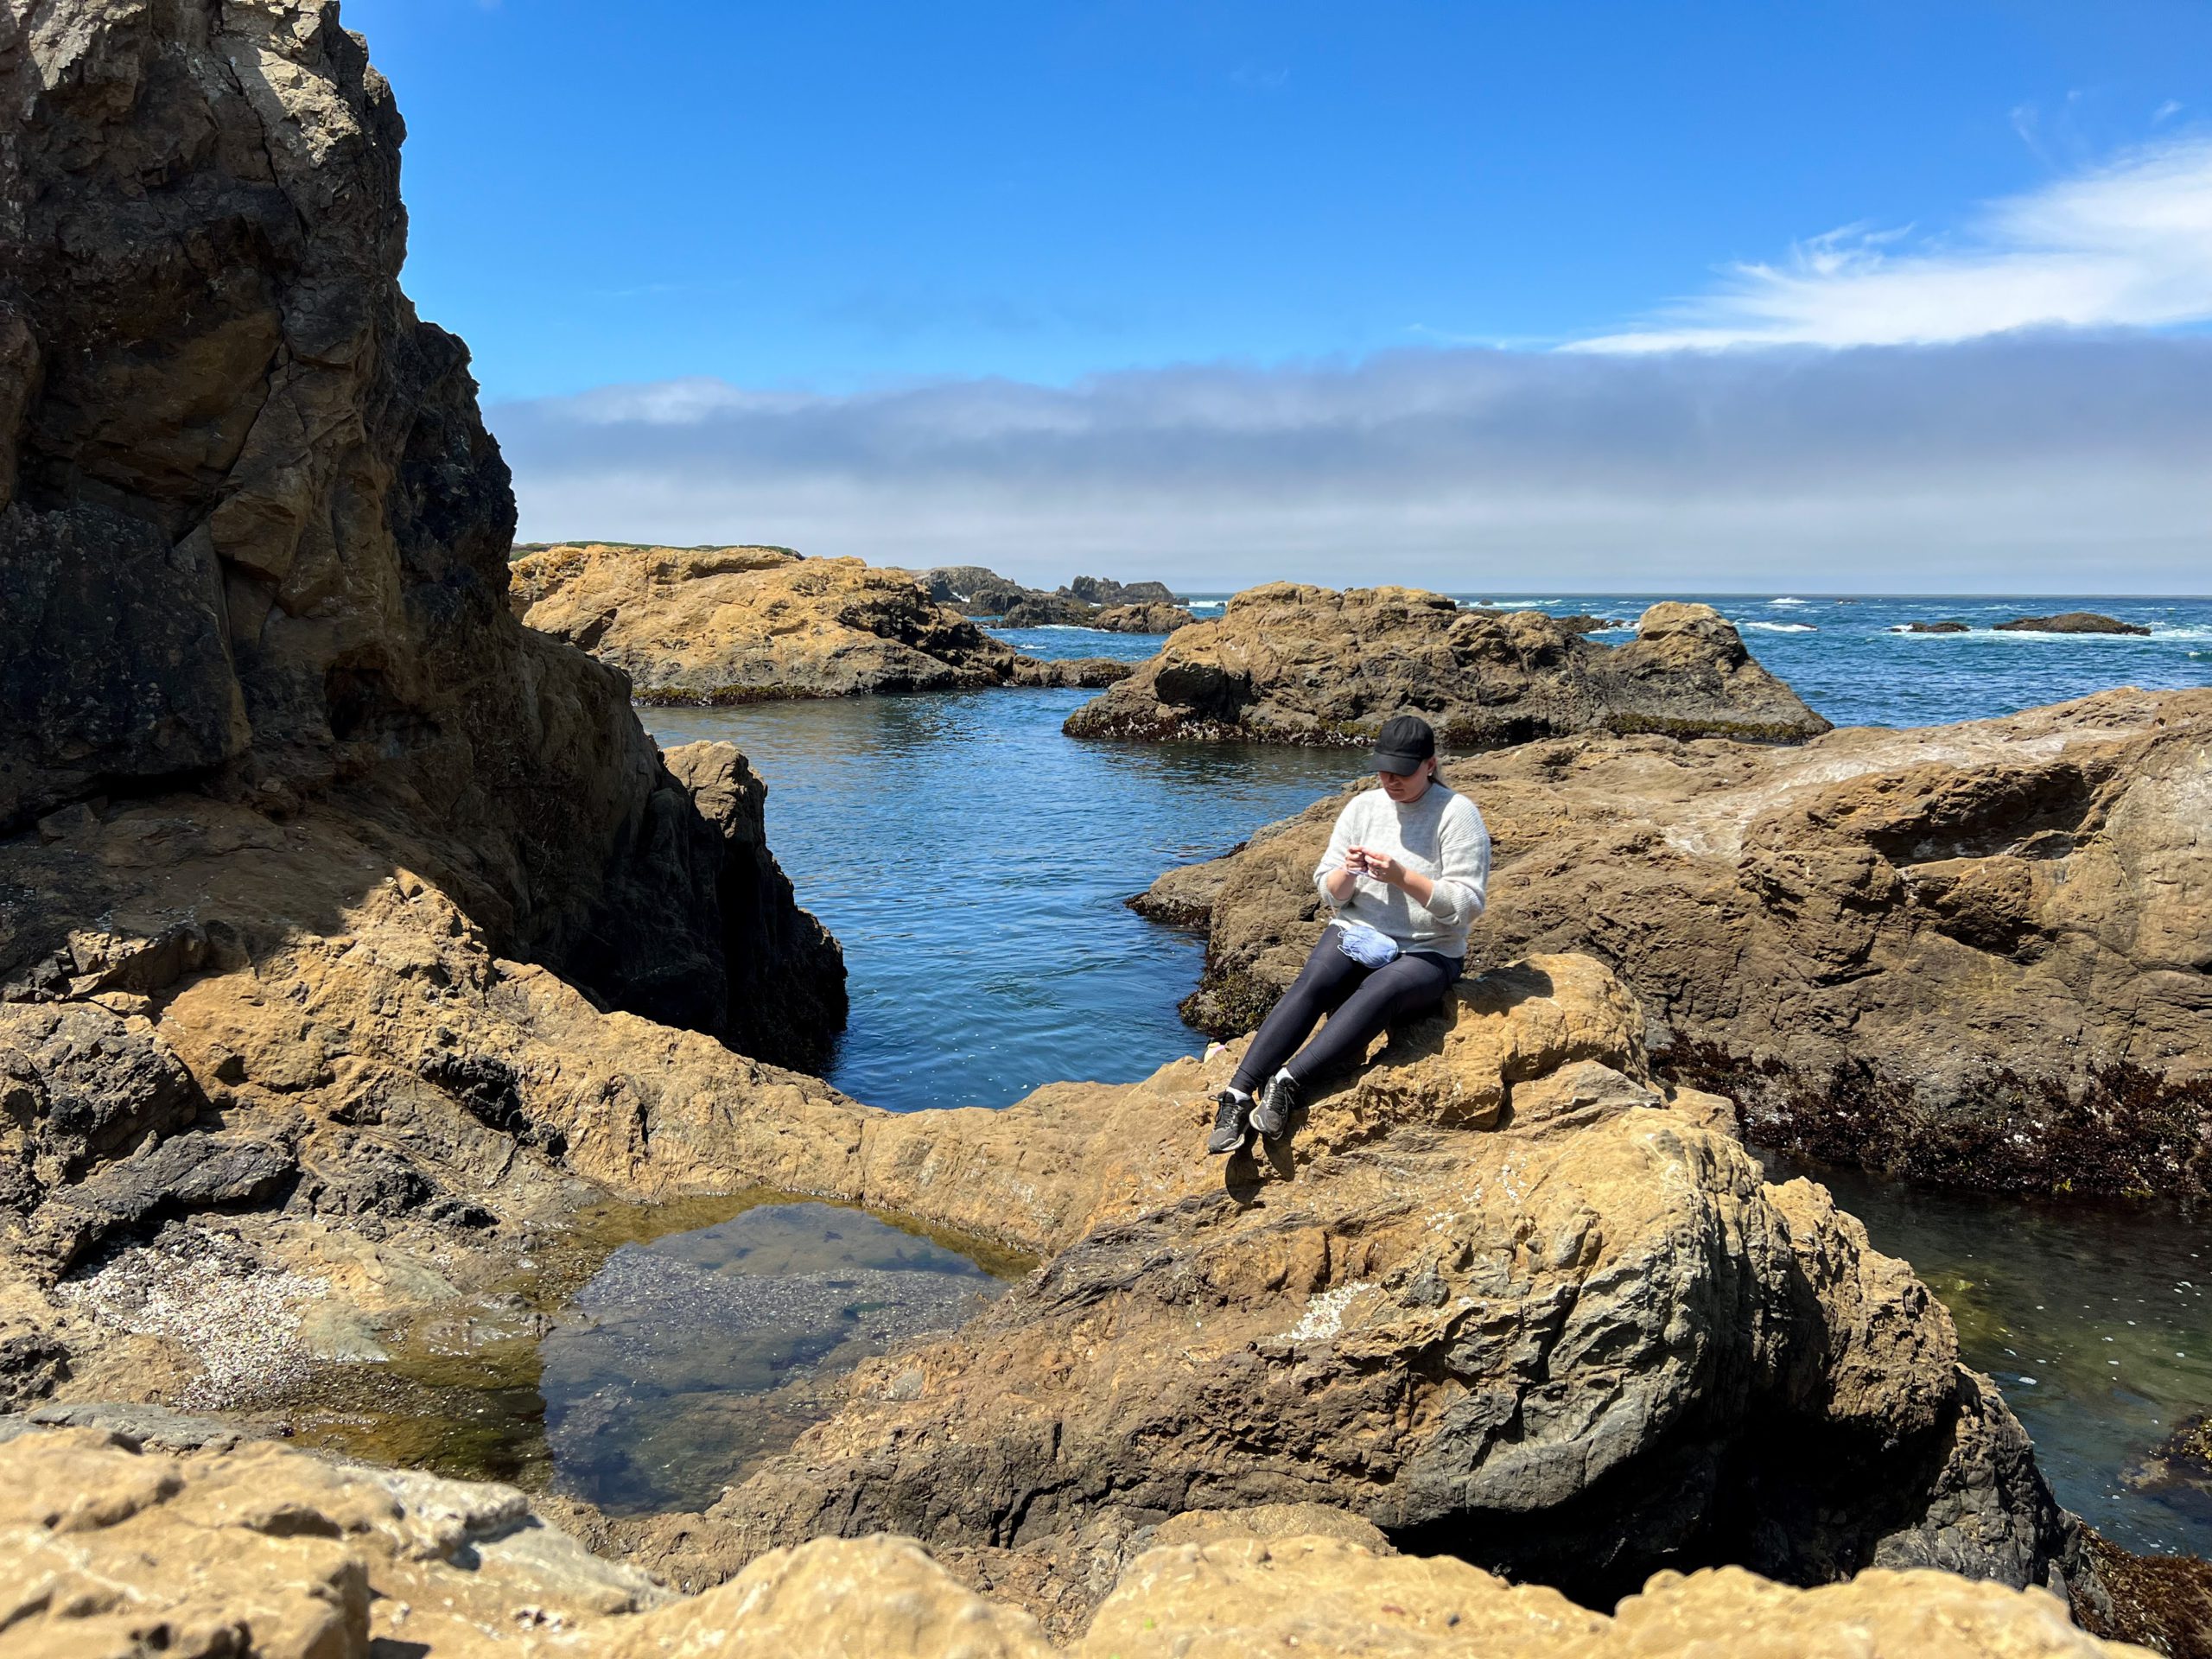 A woman in a black baseball cap, gray sweater, and black leggings sits knitting on a rocky outcropping with the ocean and some dramatic, looming clouds behind her.